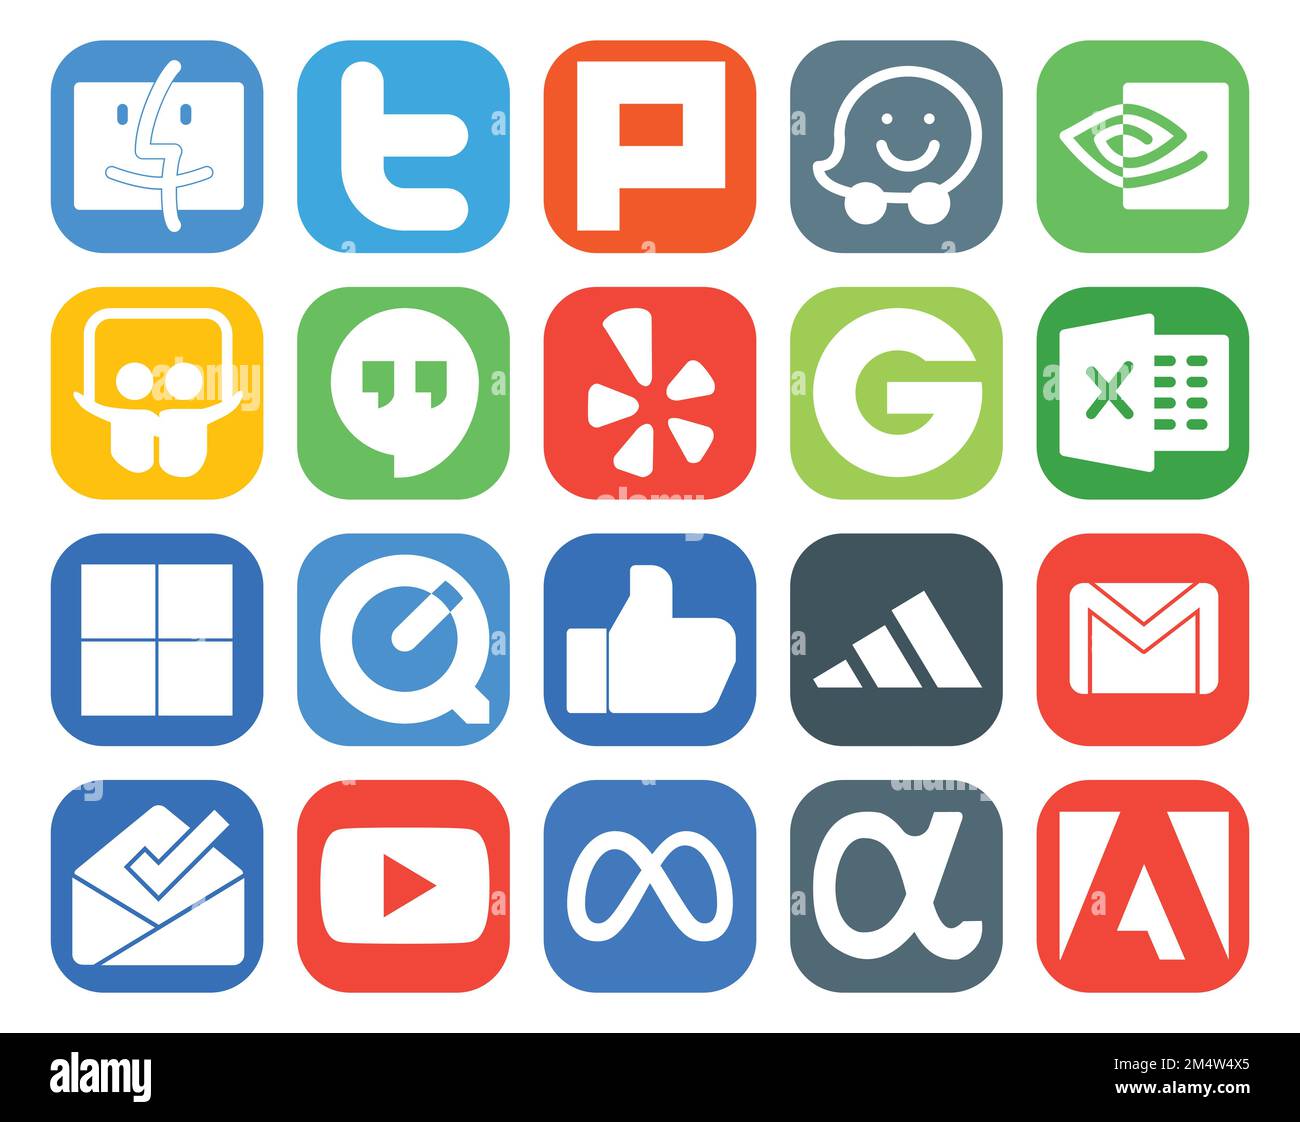 20 Social Media Icon Pack Including mail. gmail. yelp. adidas. quicktime Stock Vector